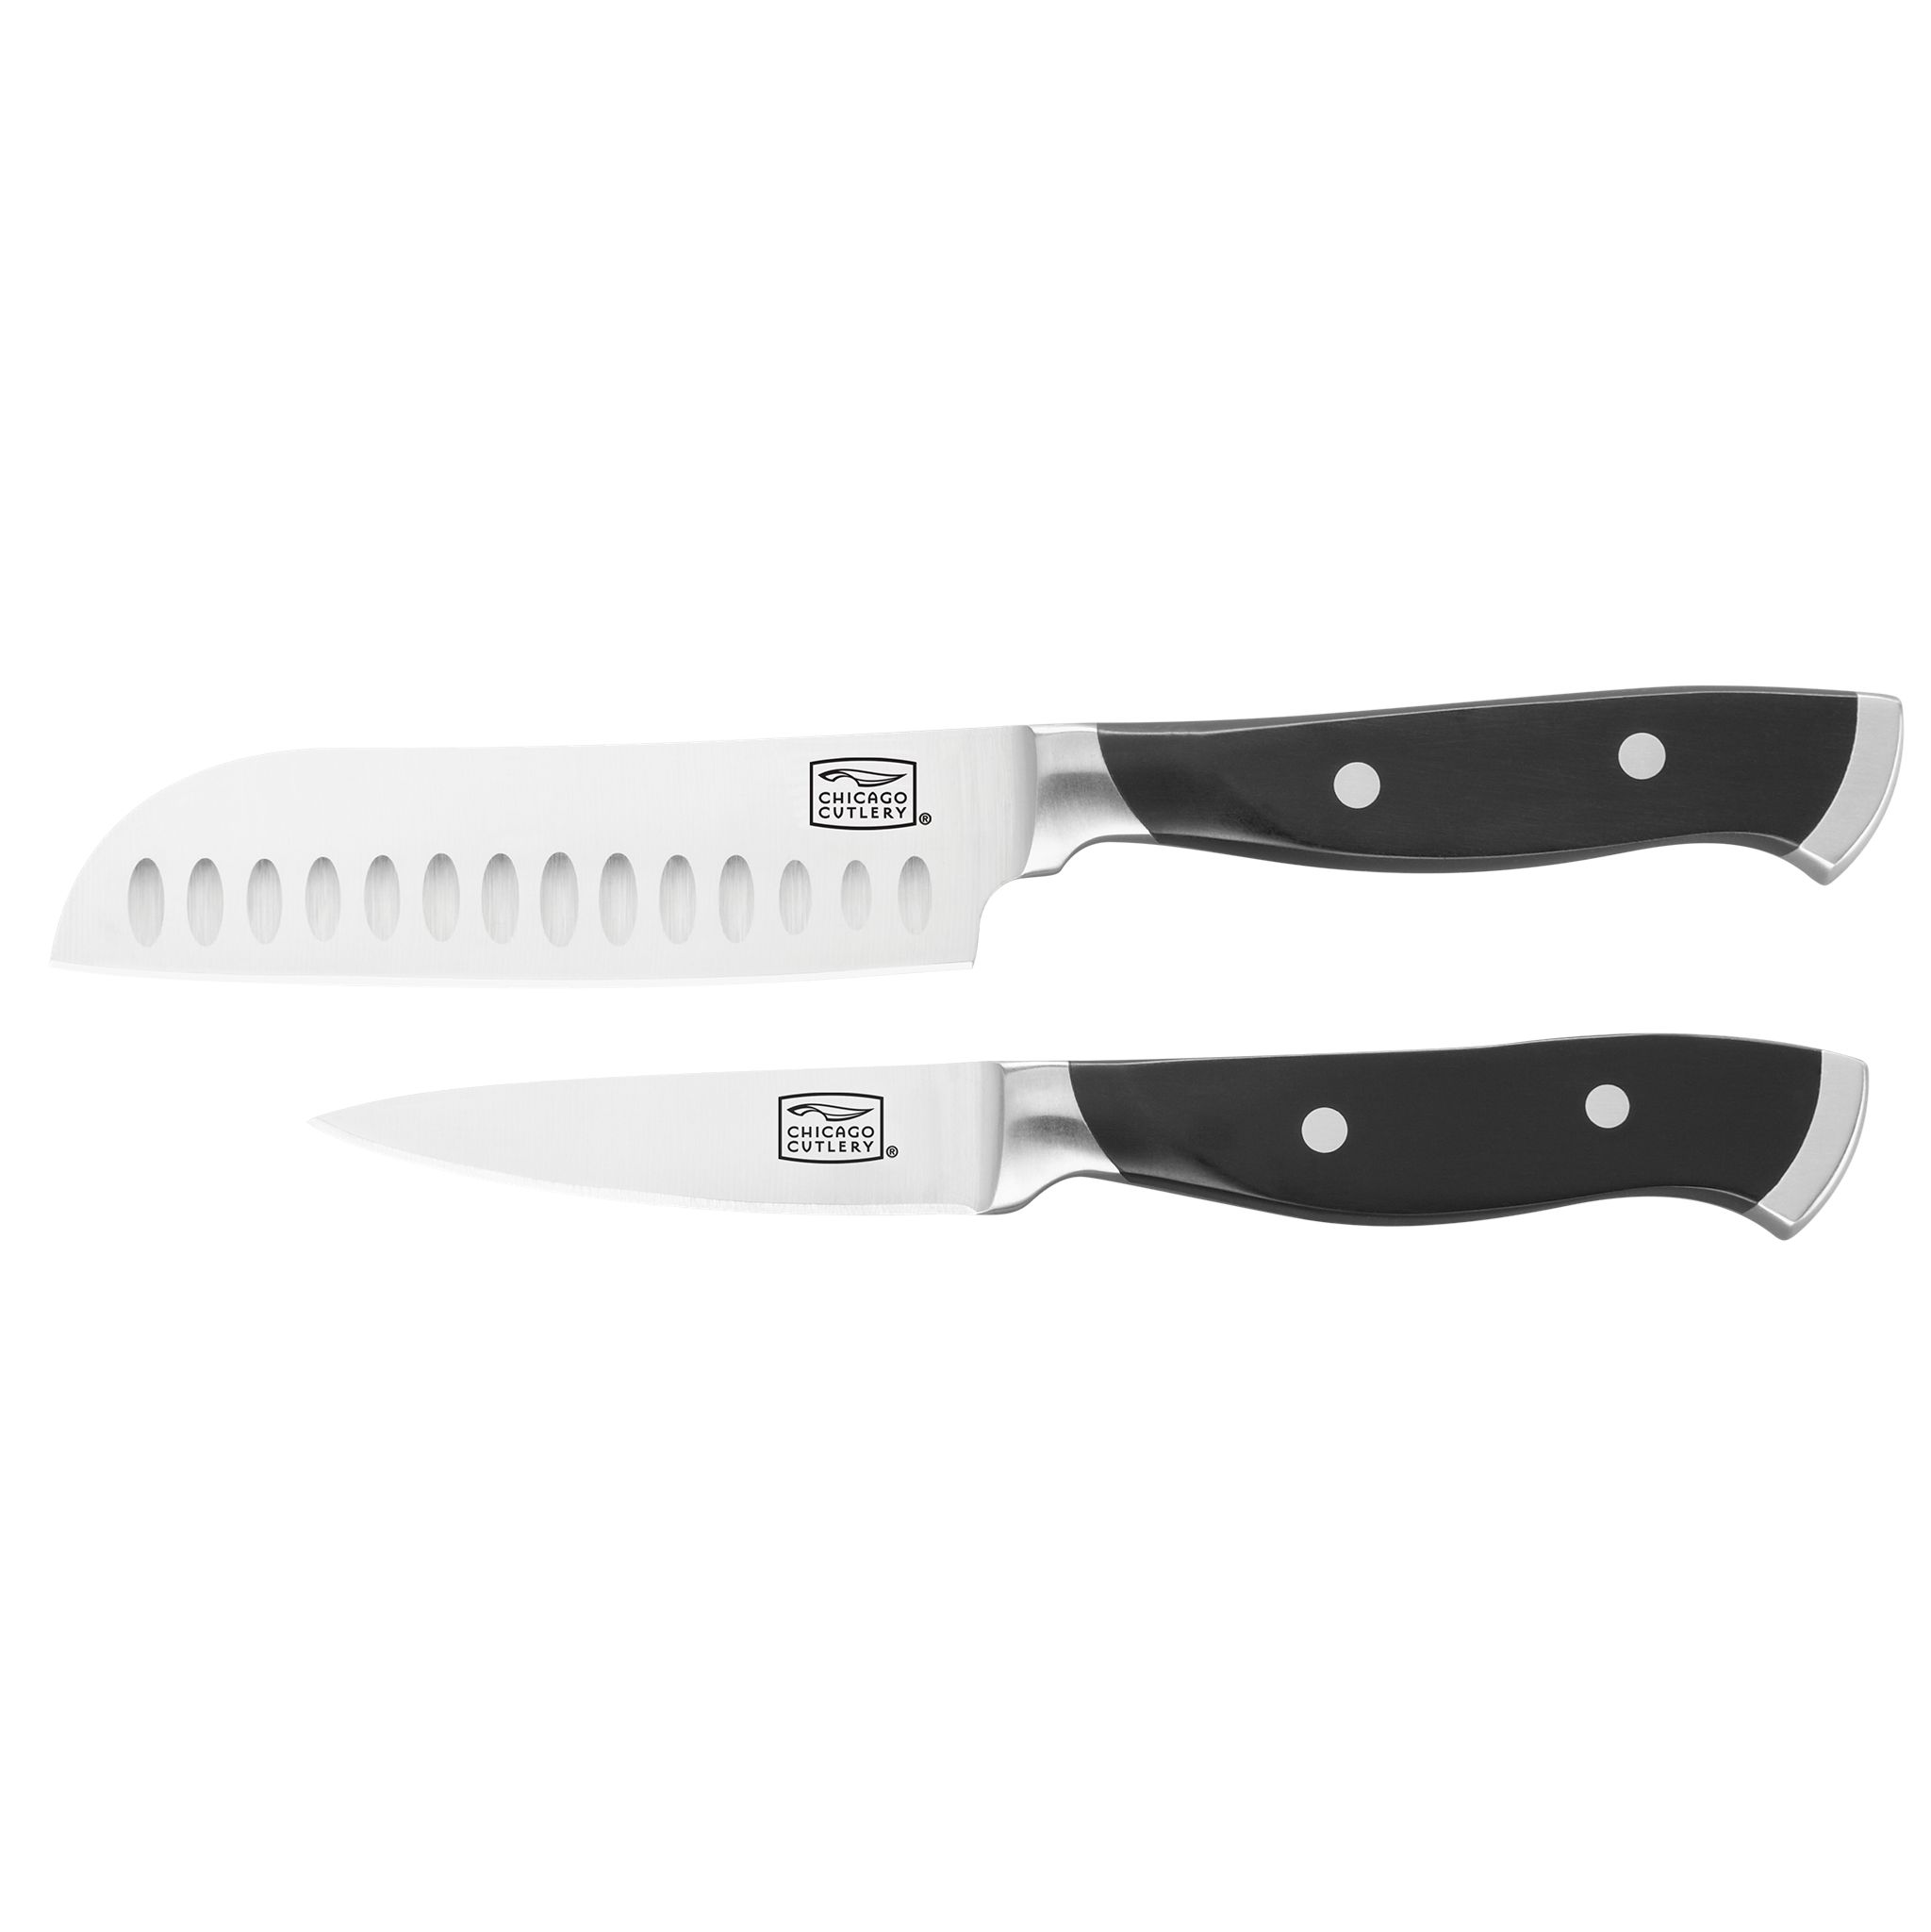 Prime Black Oxide By Chicago Cultery® 2 Piece Knife Set Giveaway